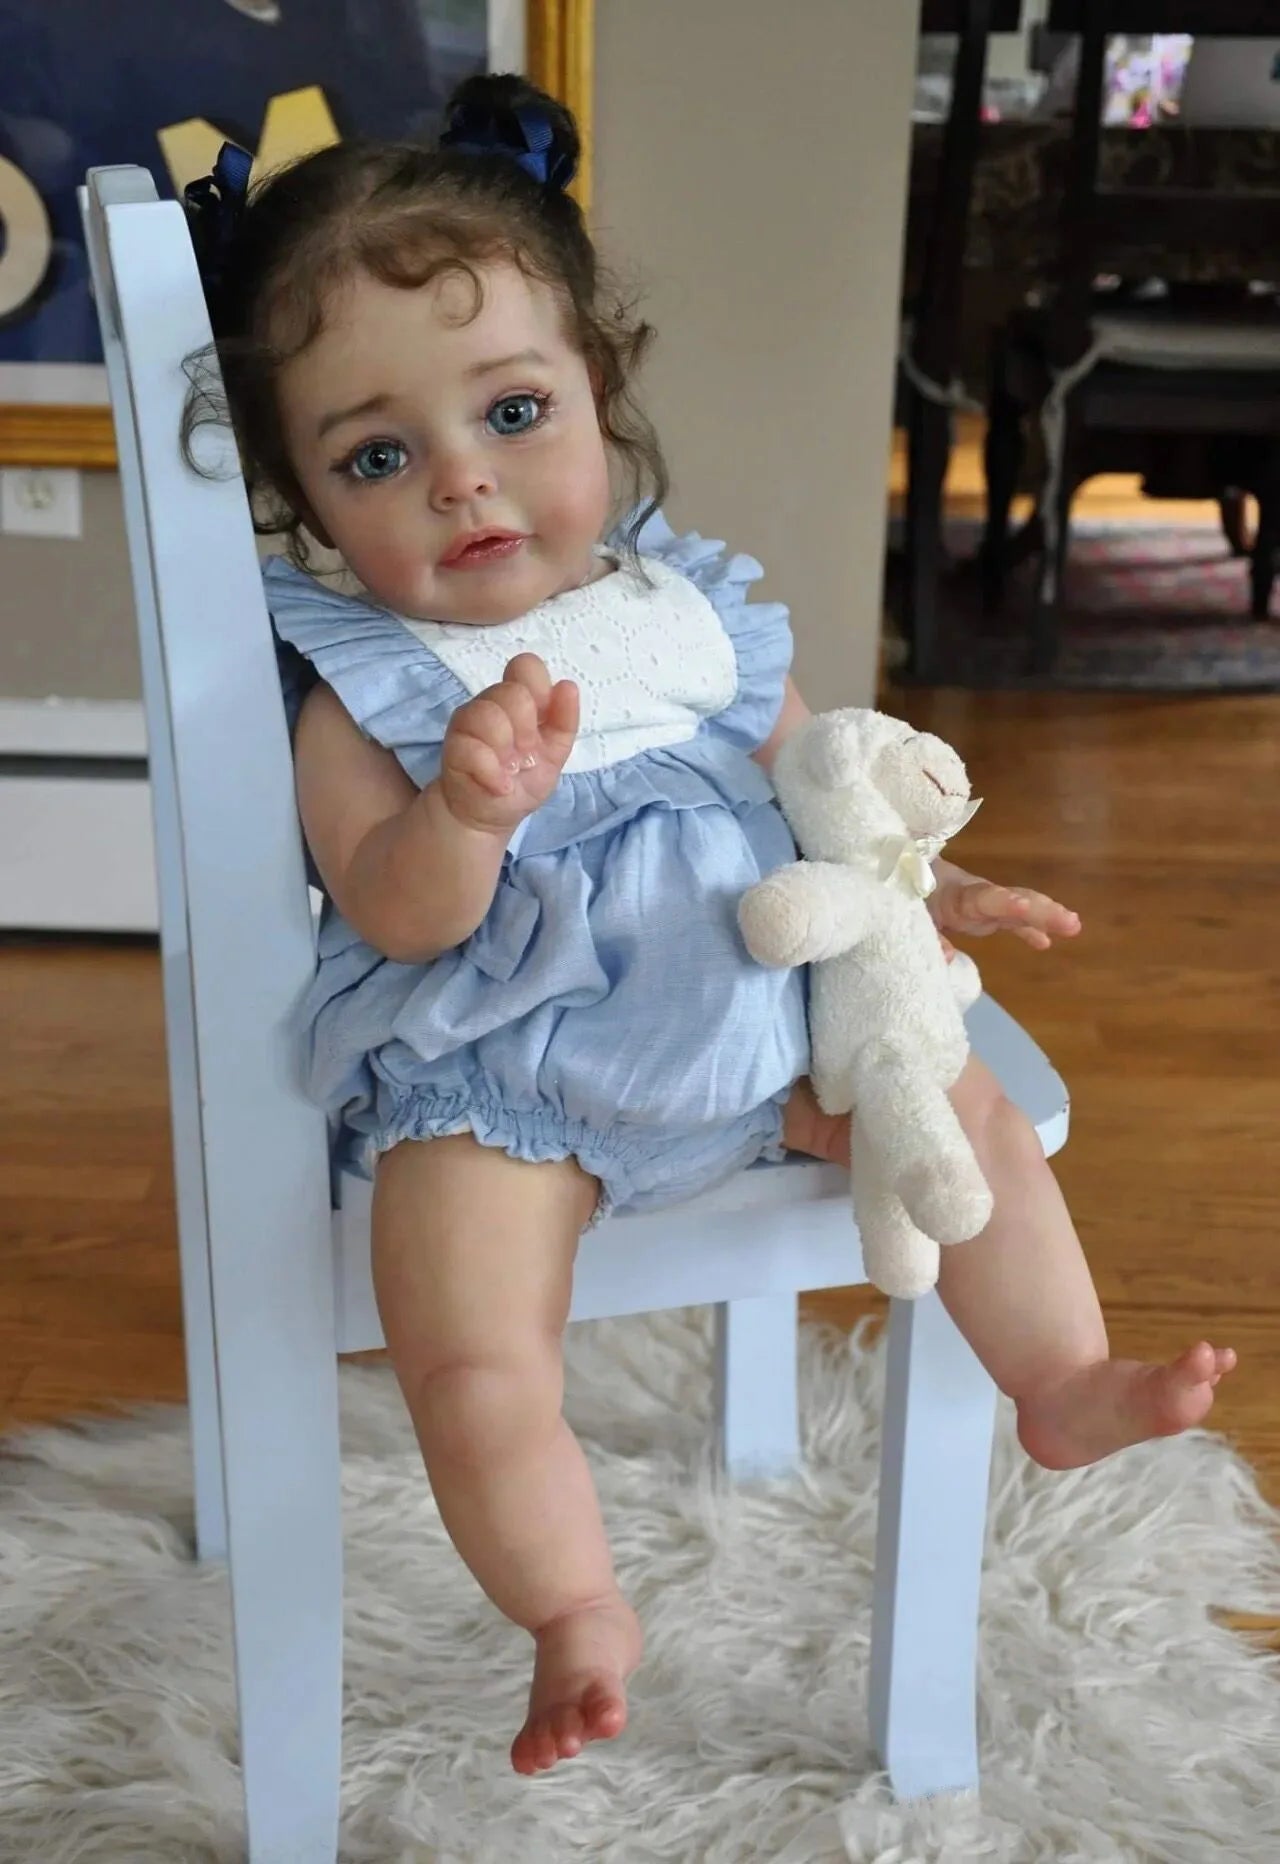 Large Baby Reborn Toddler Doll - 60cm Huge Size with High-Quality Painting - ToylandEU